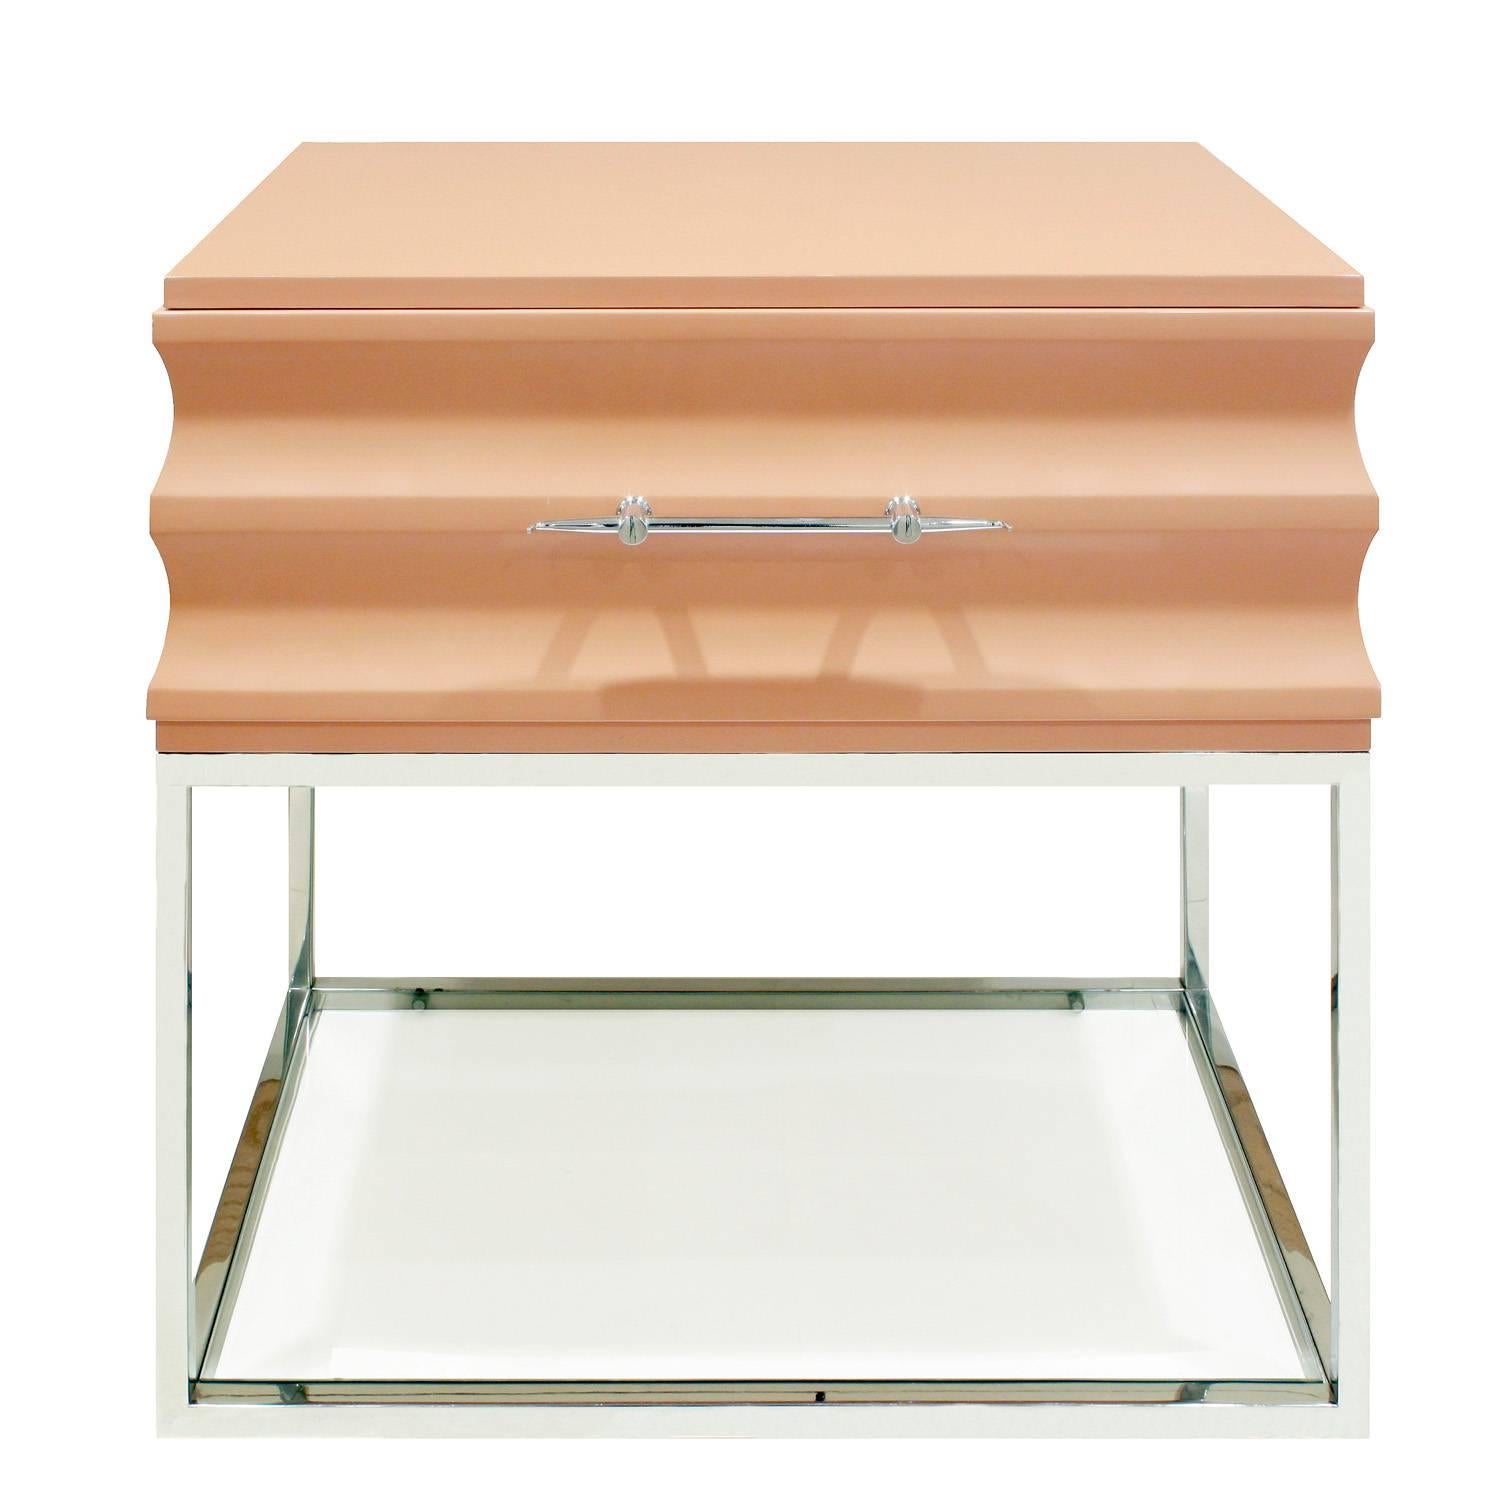 Pair of sculpted bedside tables, lacquered with exquisite polished chrome pulls and bases with inset glass shelves at bottom by Tommi Parzinger for Parzinger Originals, American, 1960s (branded “Parzinger Originals” in drawers).
 